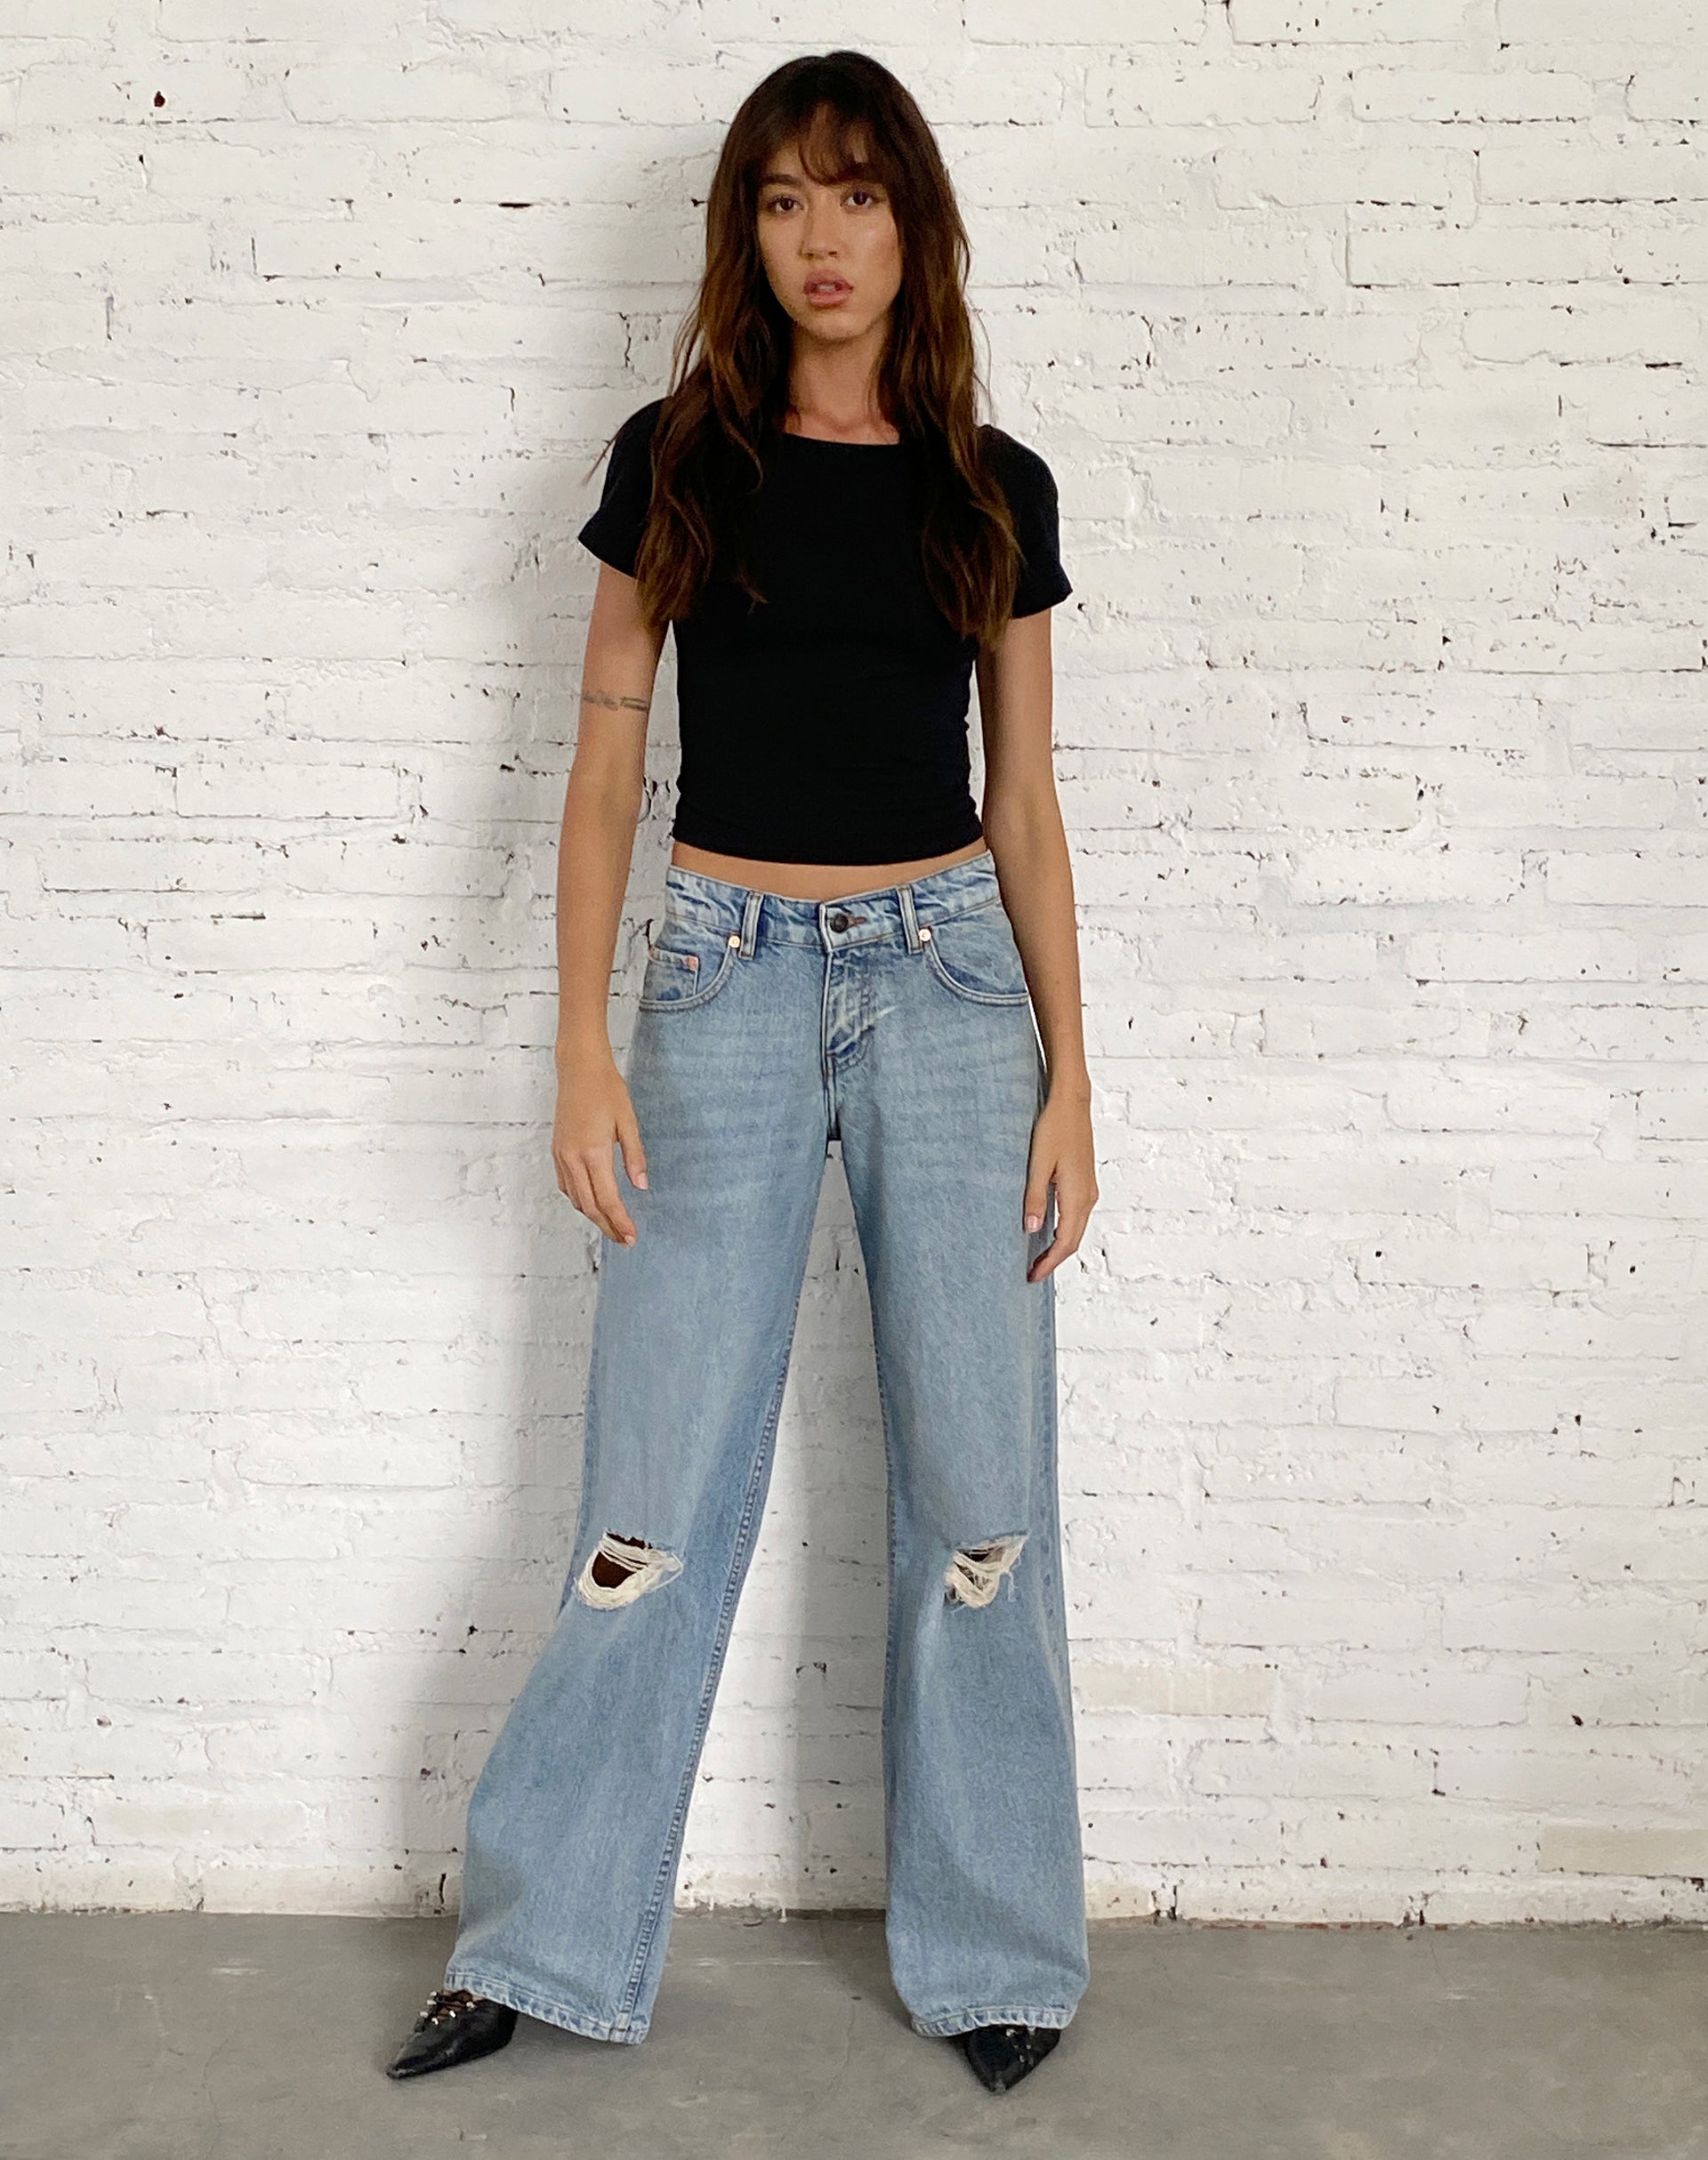 Bild von Ripped Roomy Extra Wide Low Rise Jean in Vintage Blue Wash